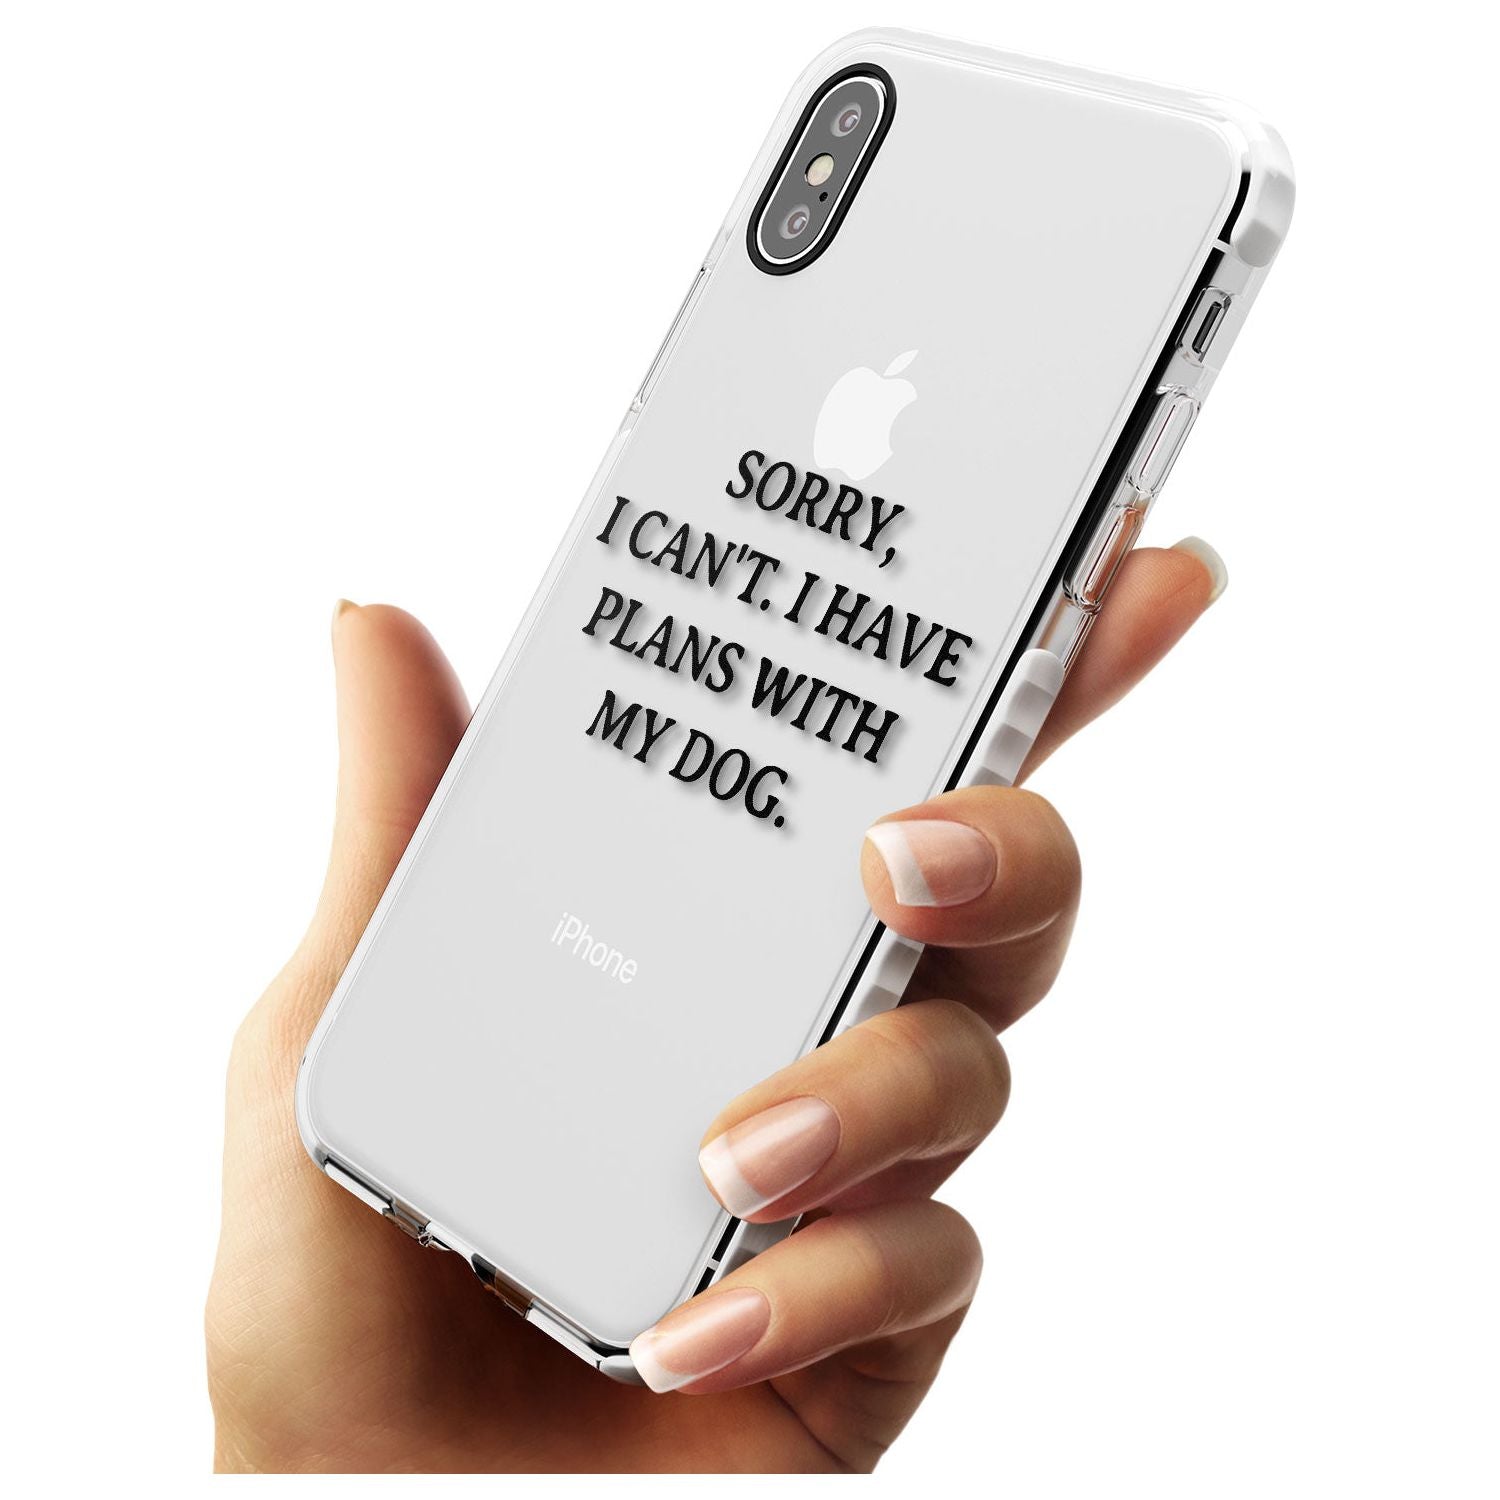 Plans with Dog Impact Phone Case for iPhone X XS Max XR